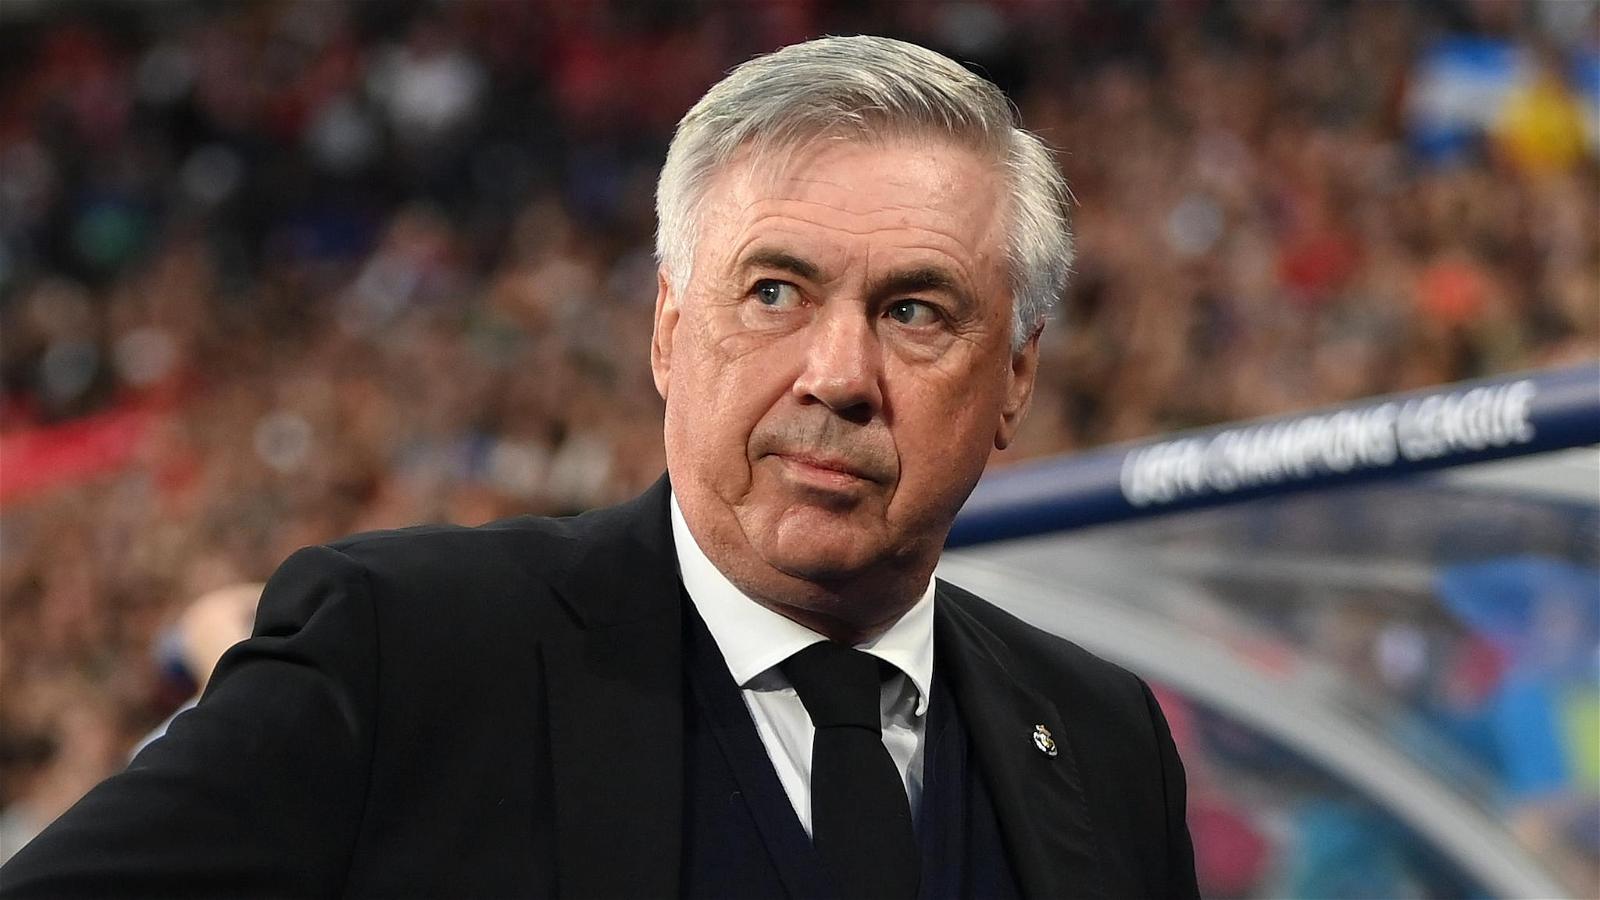 Injury crisis ‘can motivate us’, says Real Madrid boss Ancelotti